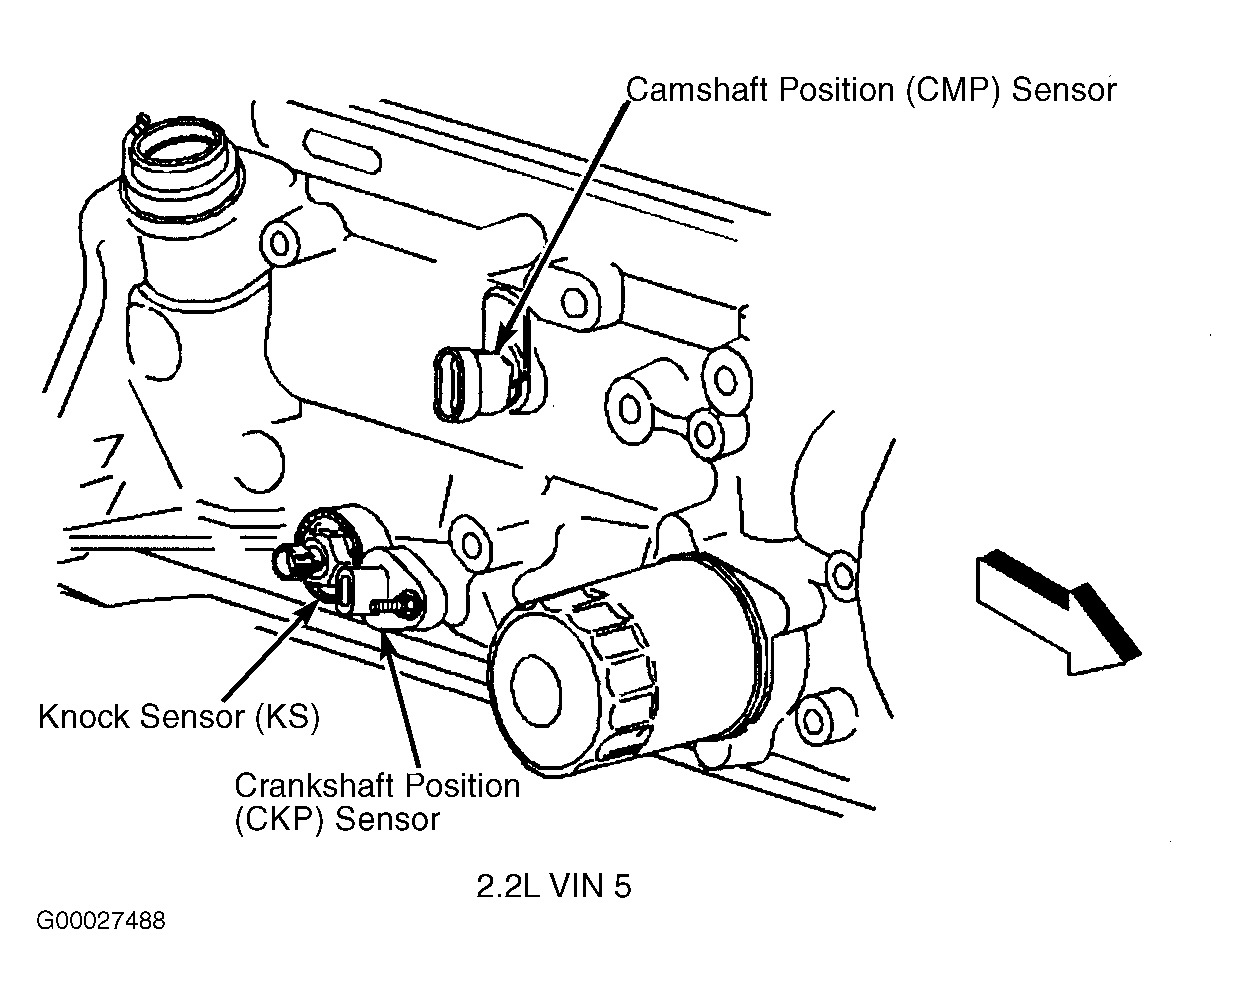 GMC Sonoma 2001 - Component Locations -  Right Side Of Engine (2.2L VIN 5)